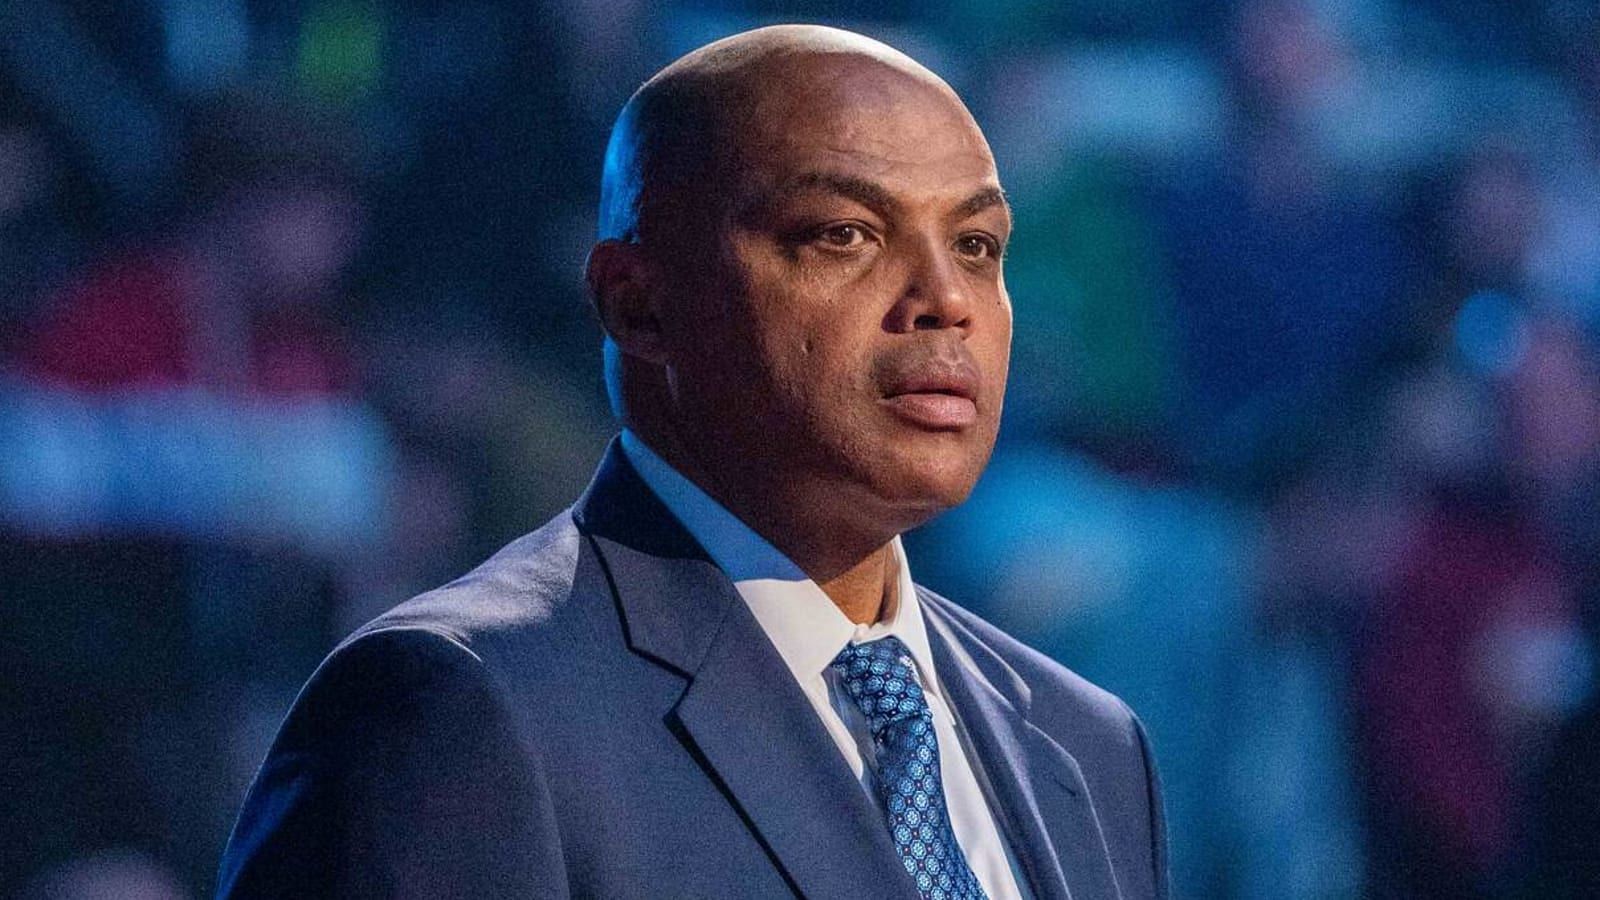 Inside the NBA analyst and Hall of Fame player Charles Barkley